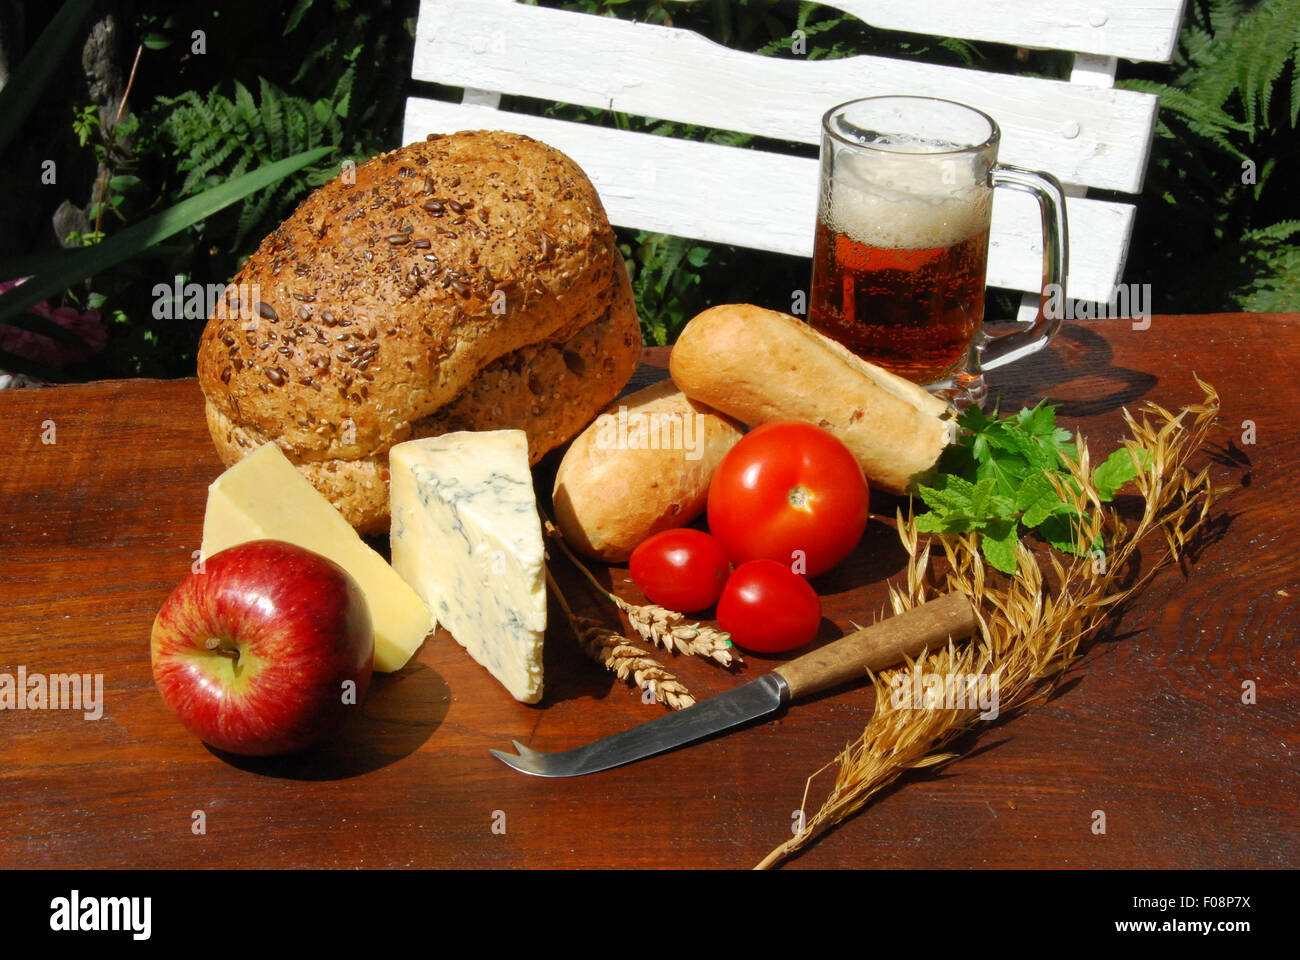 PLOUGHMAN'S LUNCH. A pub garden setting of a farmers lunch, with fresh bread,cheese,apple,tomato and real ale beer Stock Photo